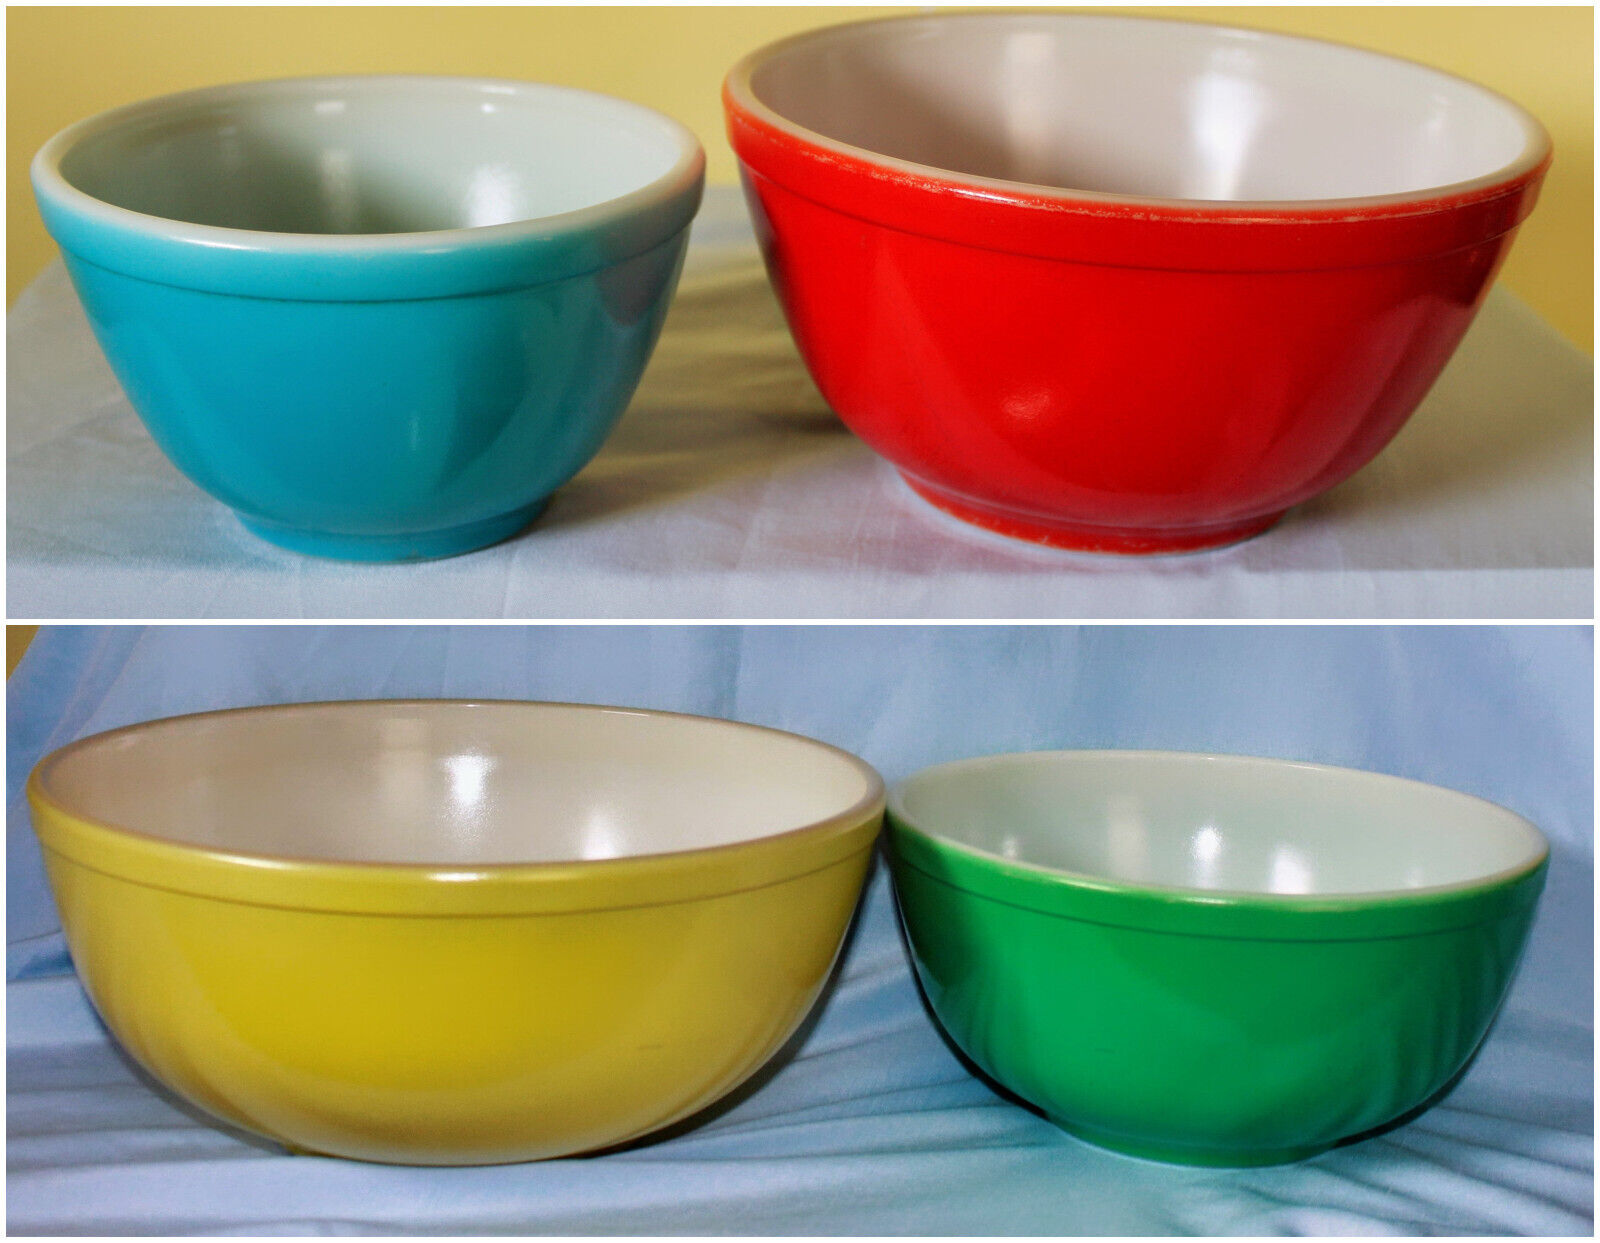 Pyrex Primary mixing nesting bowls Vintage 1940s Original Unnumbered